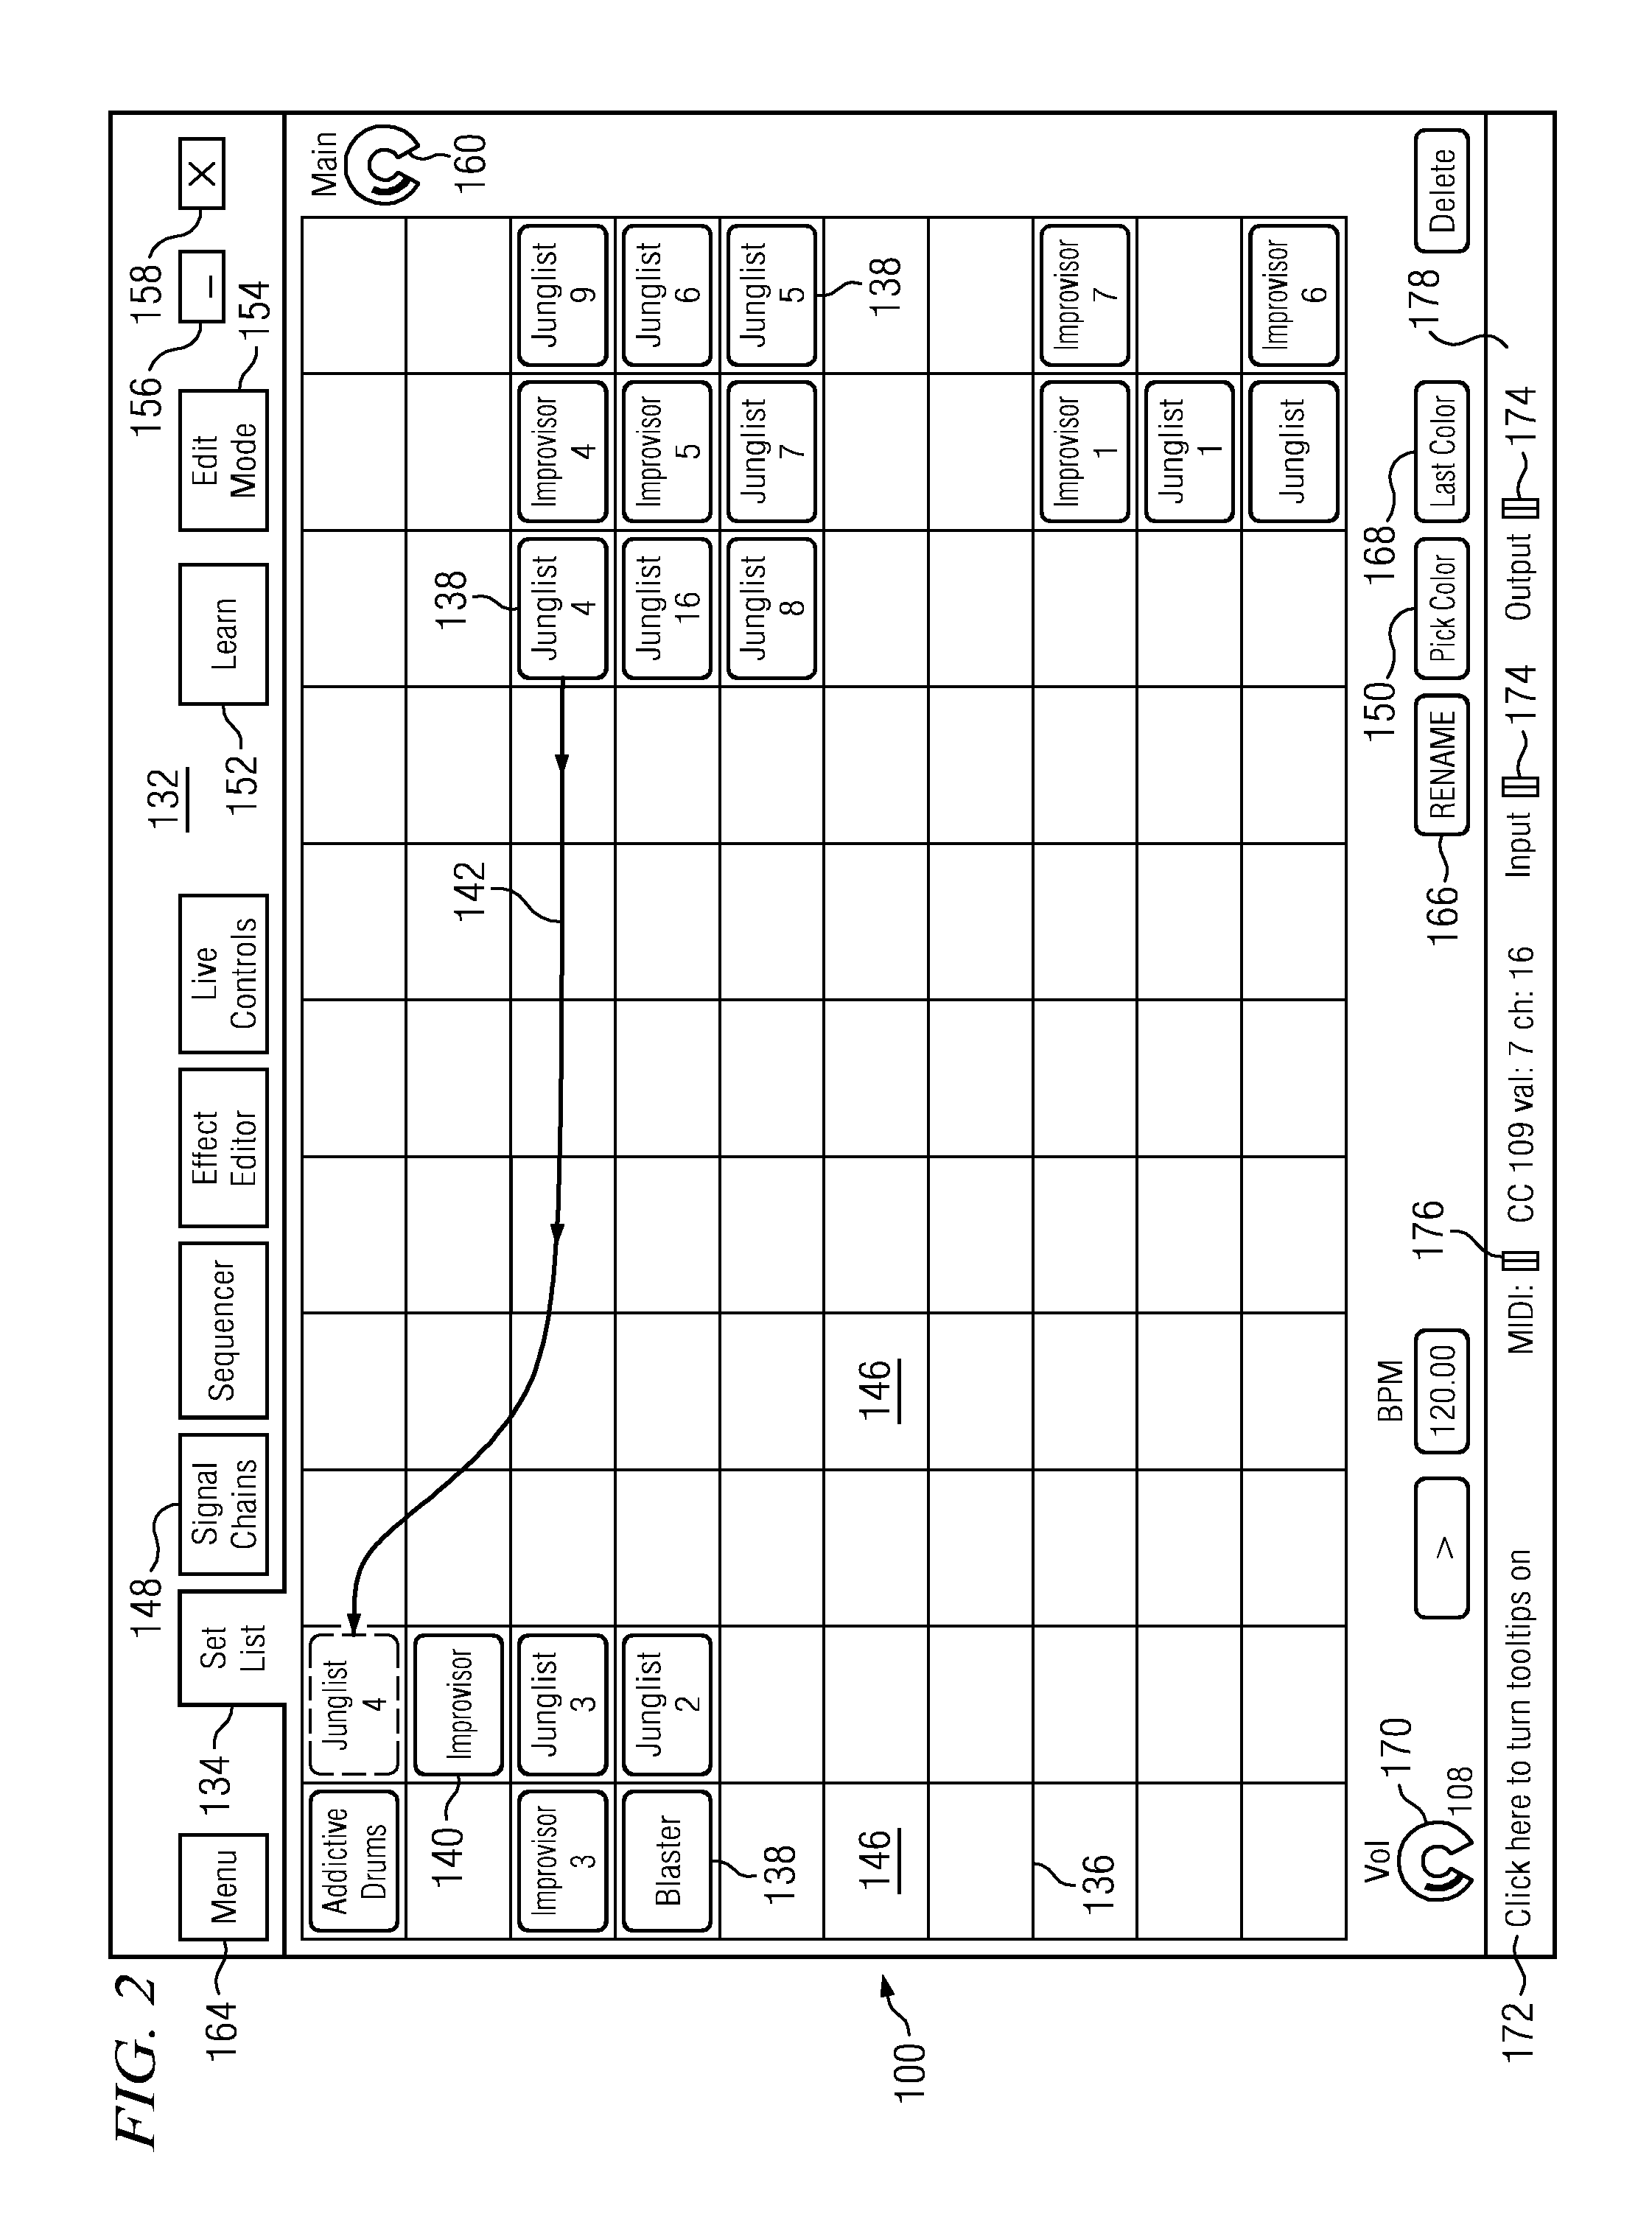 Universal music production system with multiple modes of operation